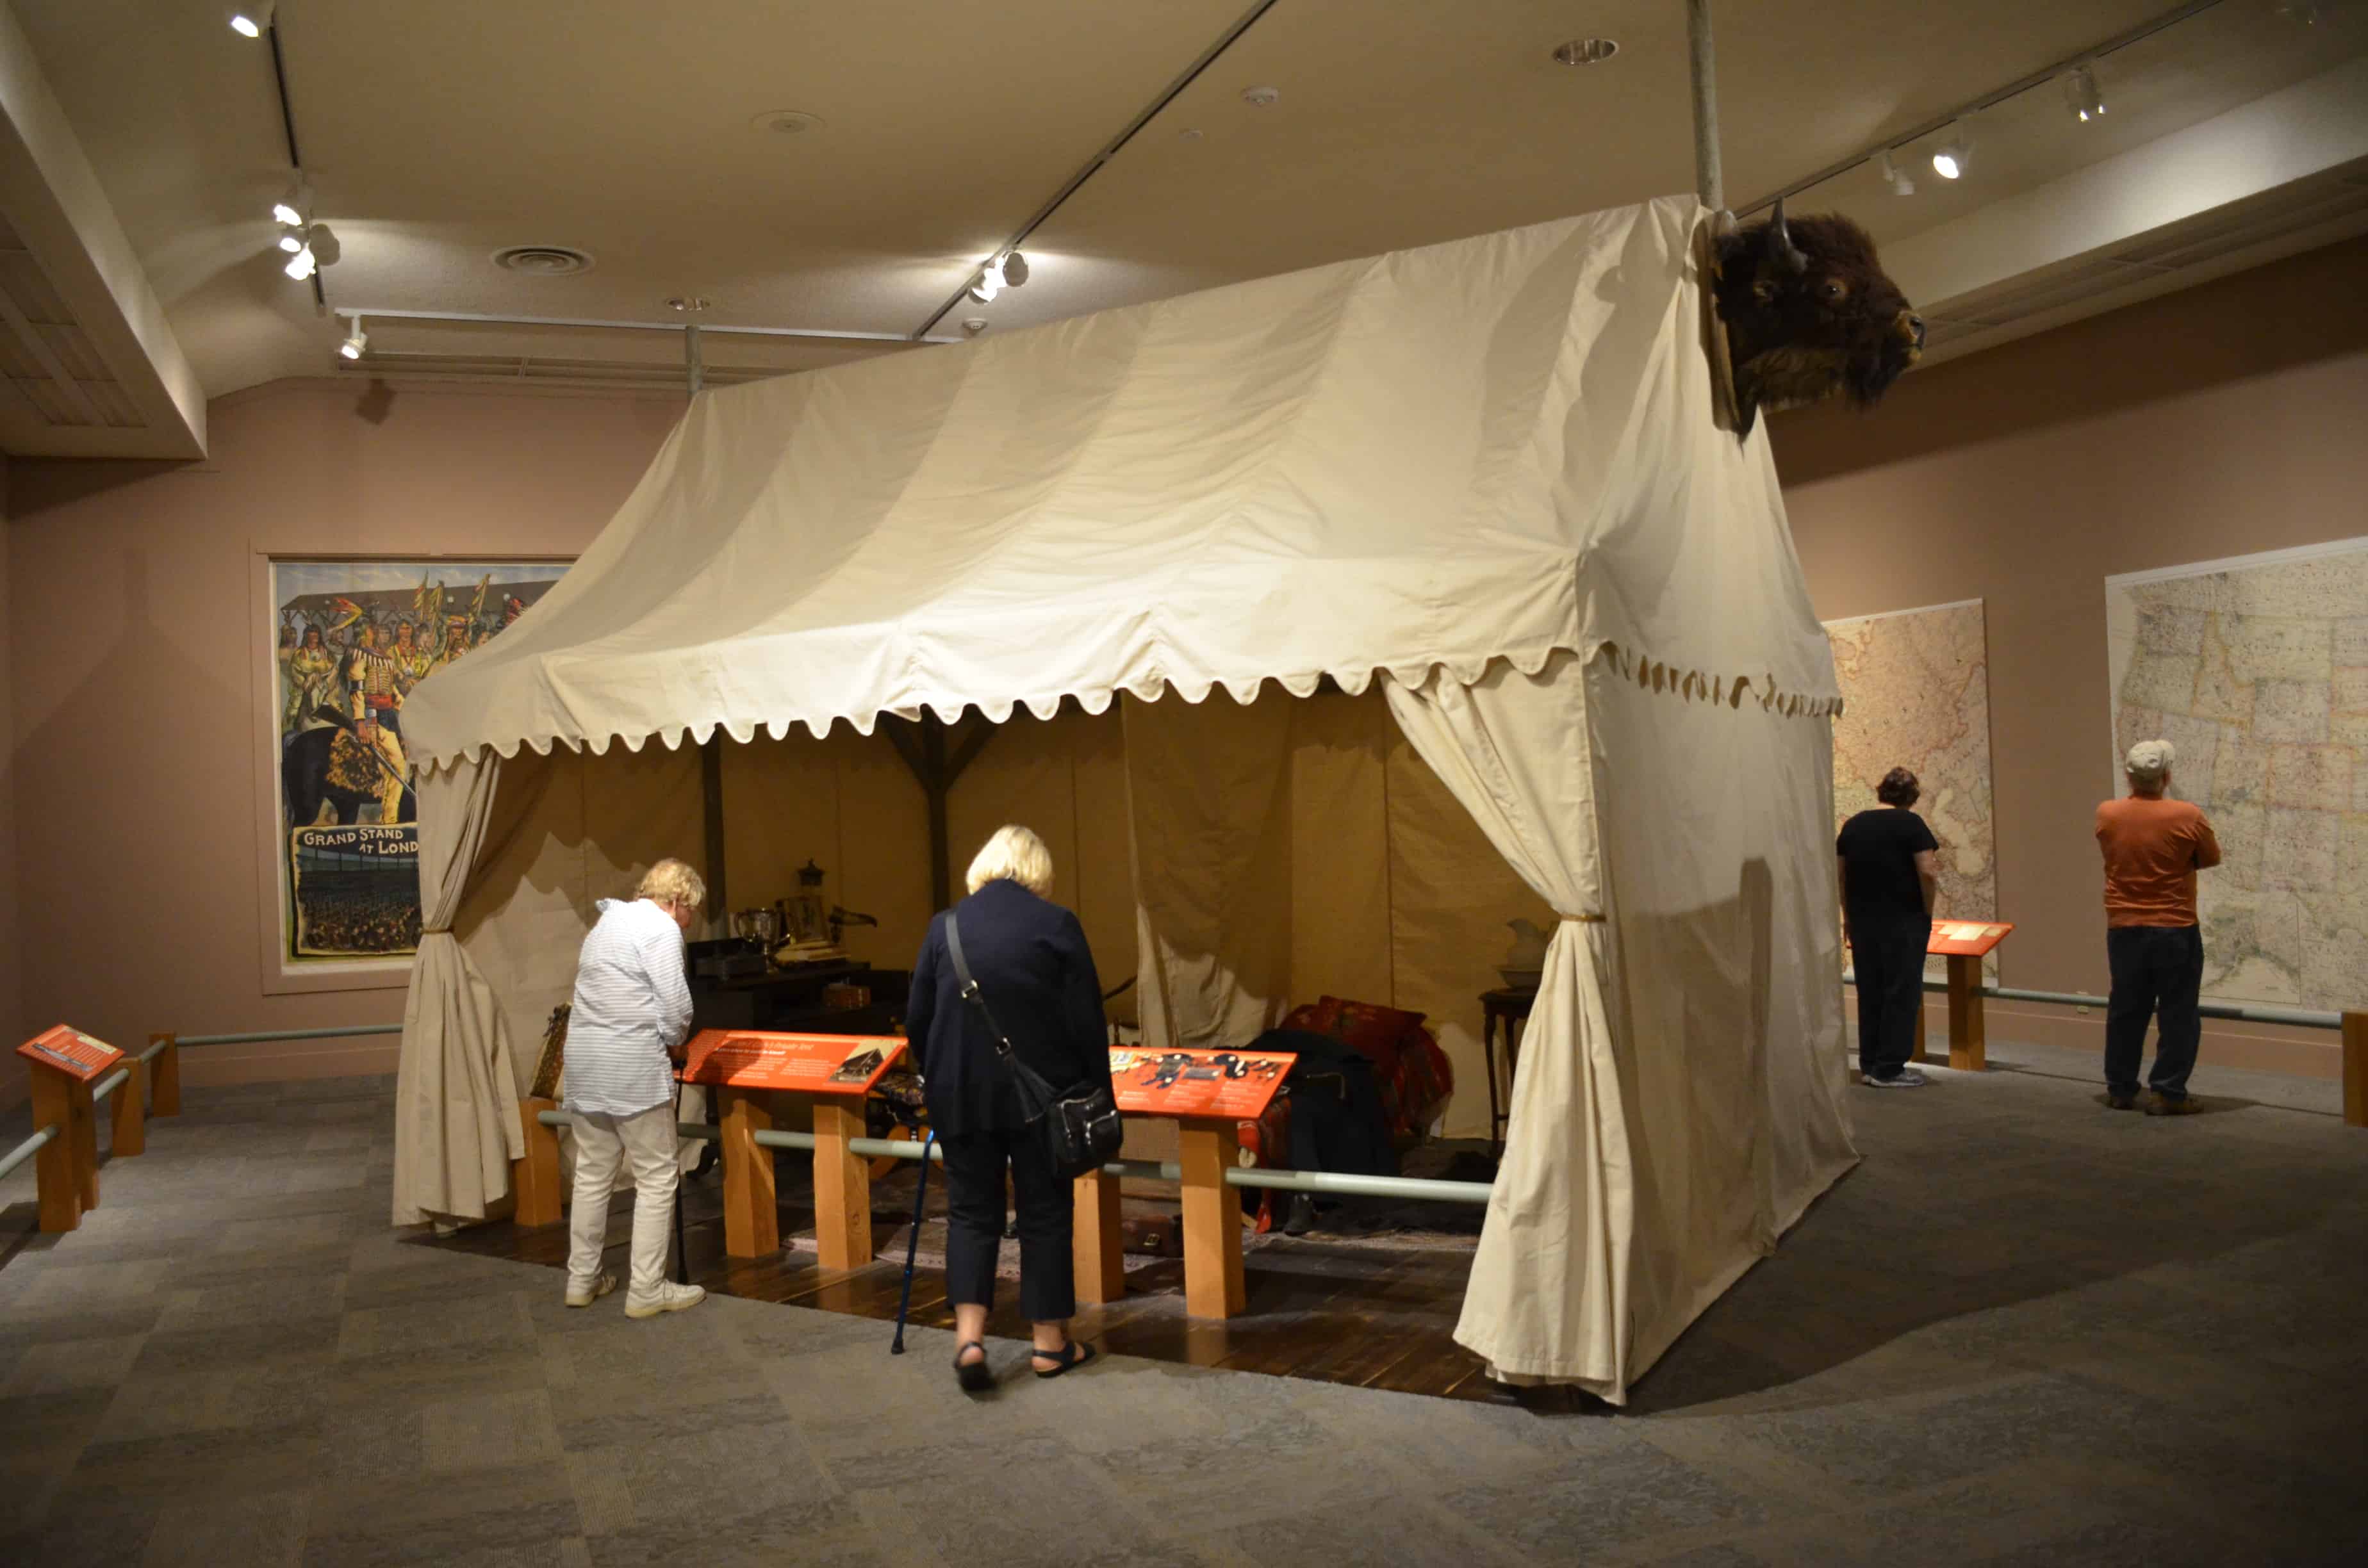 Buffalo Bill's tent from the Wild West show at the Buffalo Bill Museum at the Buffalo Bill Center of the West in Cody, Wyoming